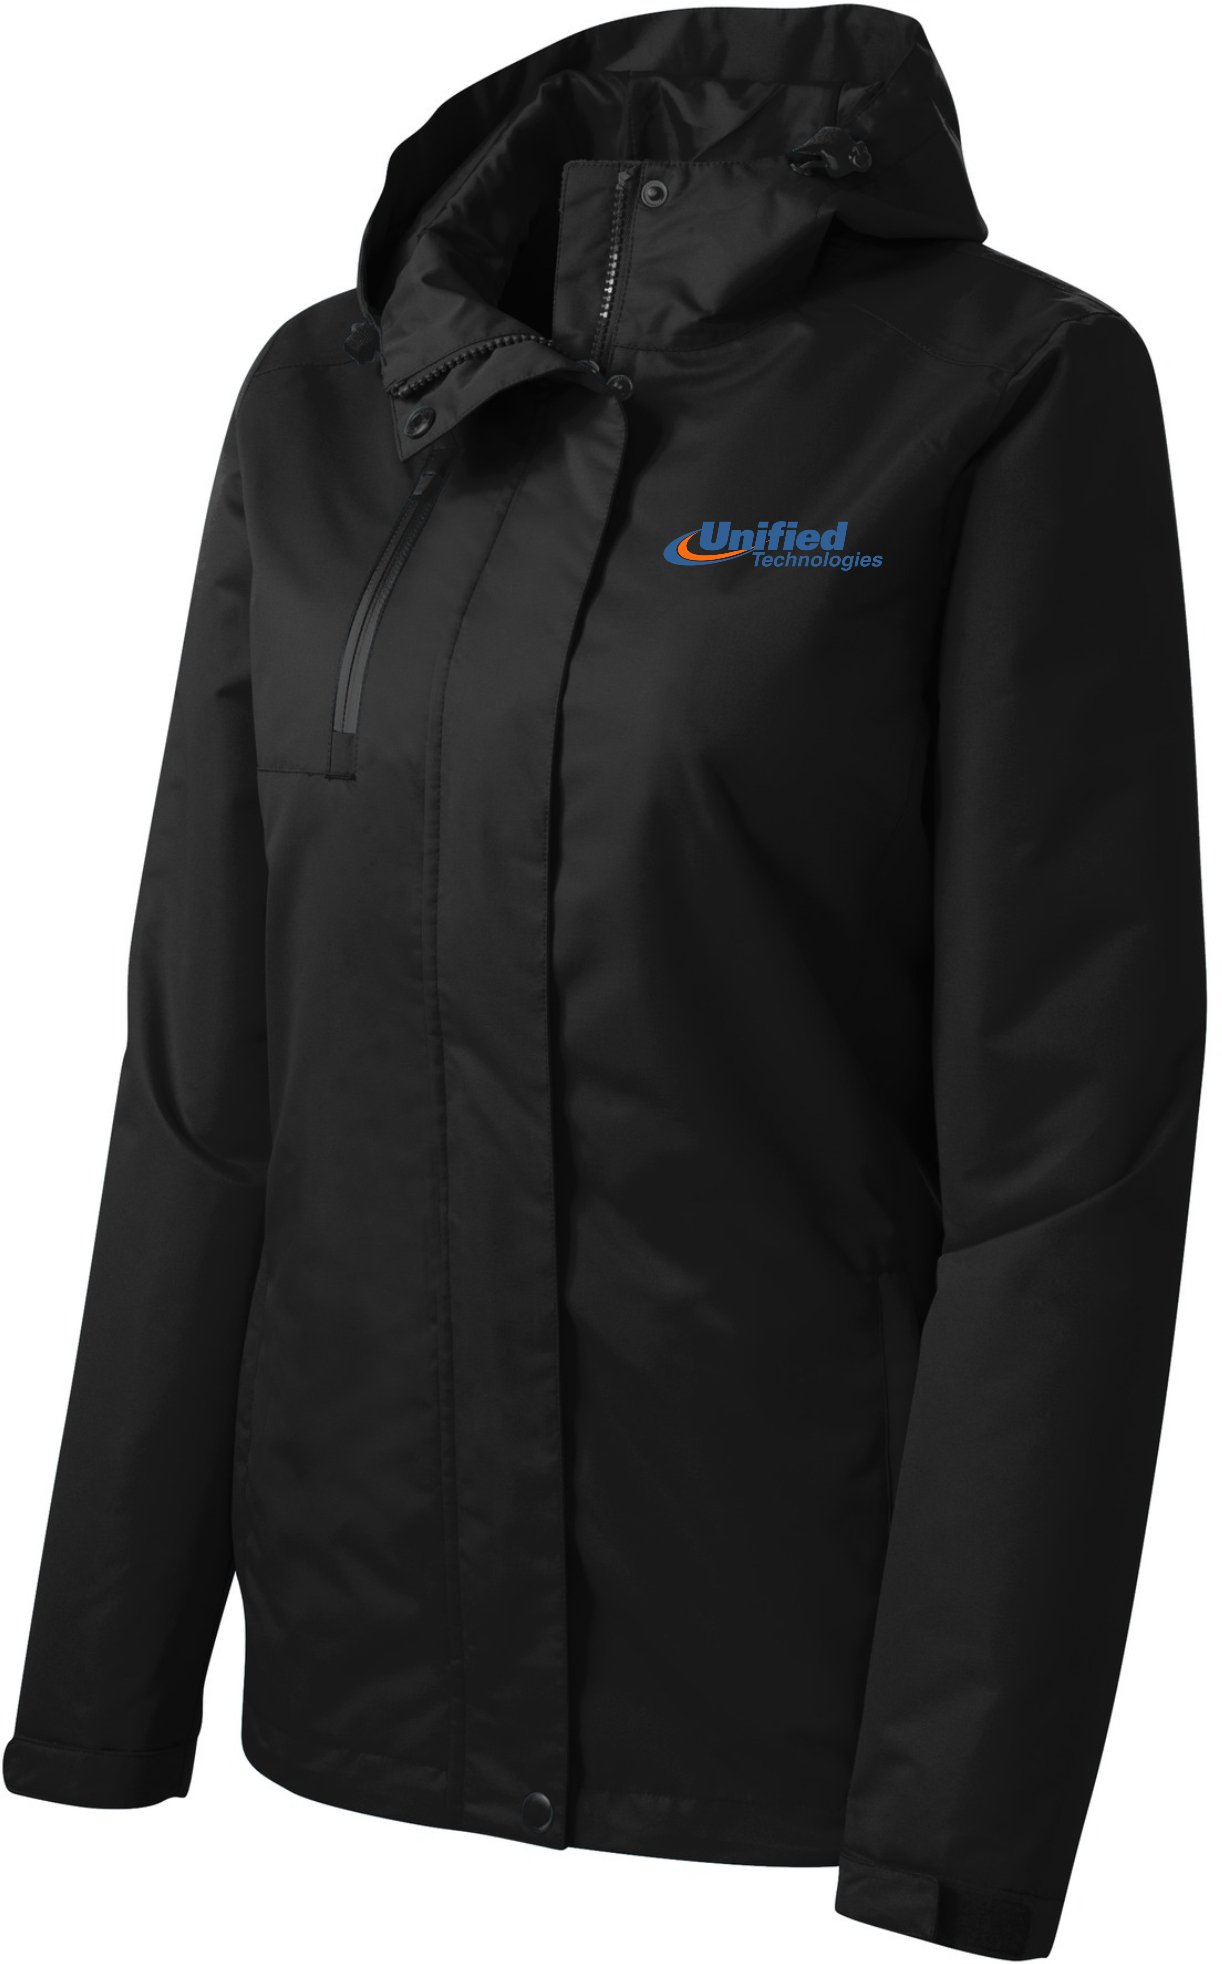 Port Authority® Ladies All-Conditions Jacket - L331